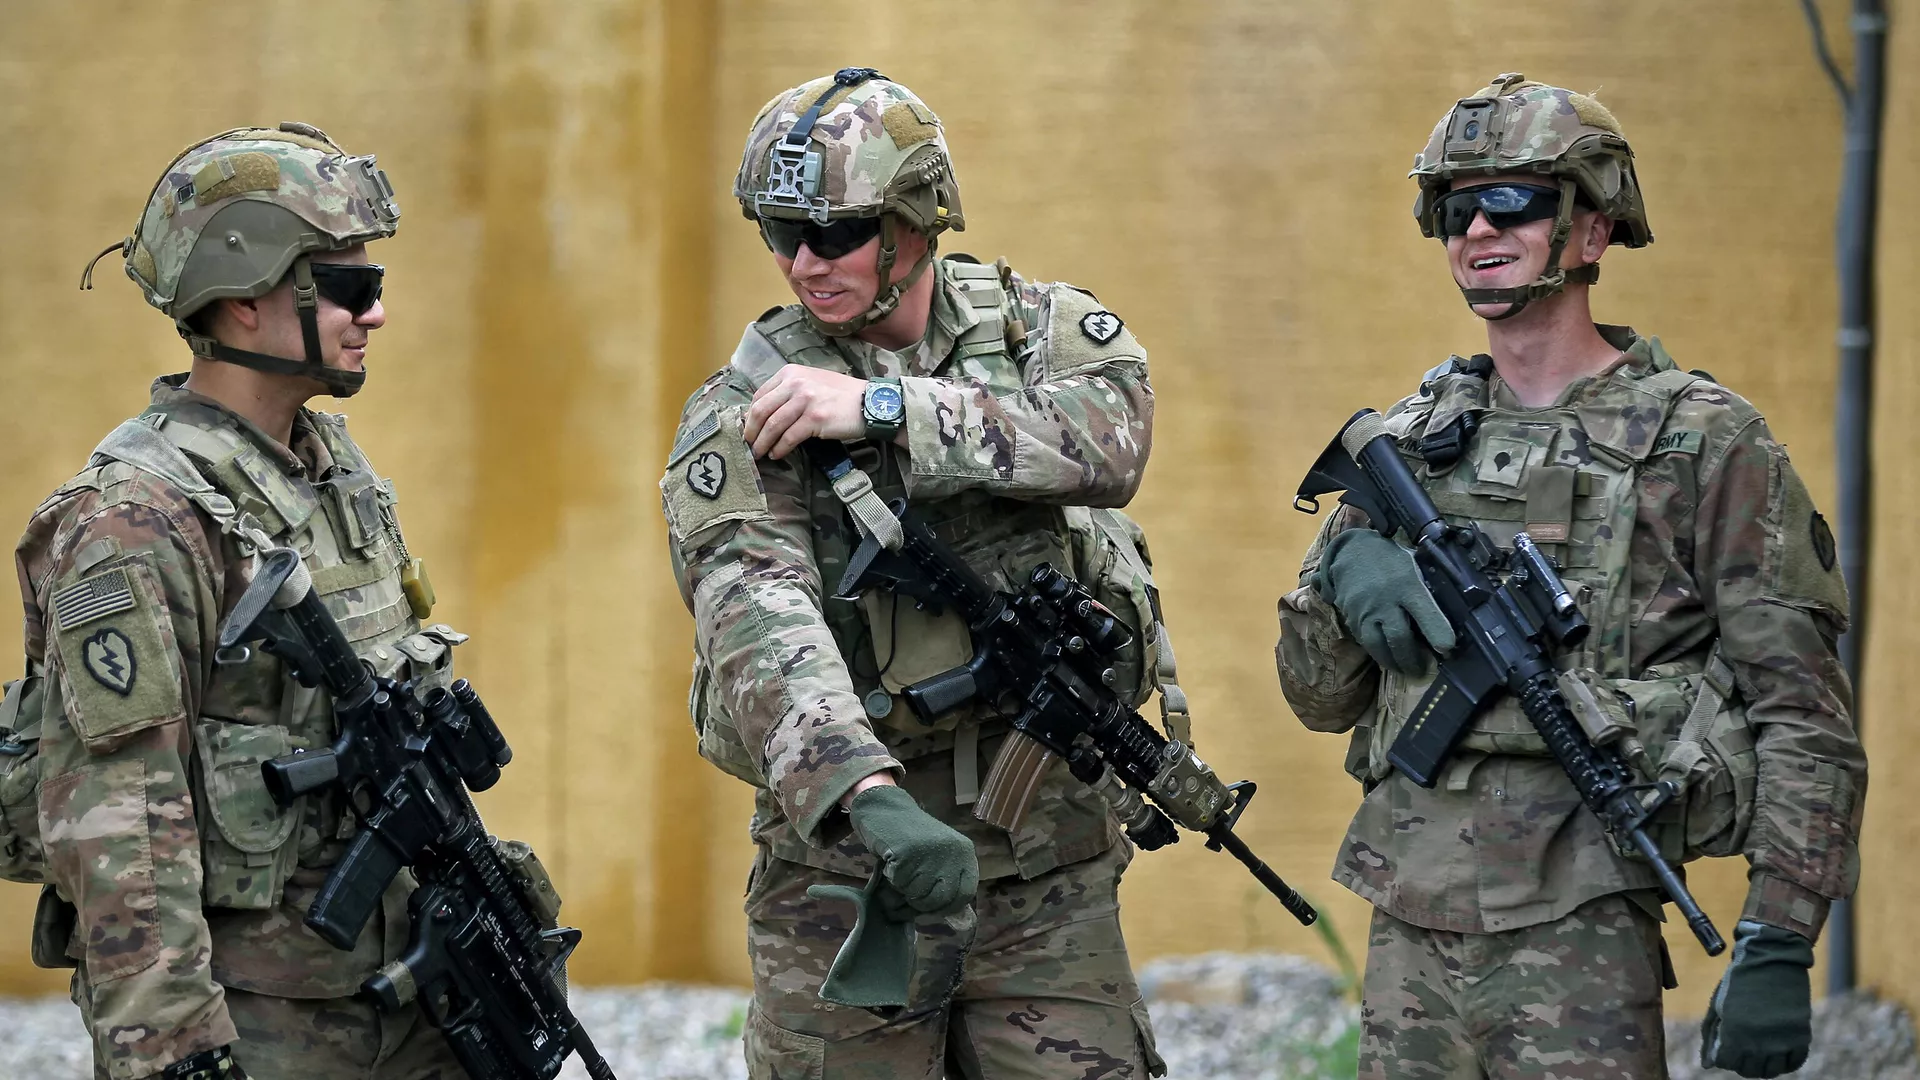 World War III Watch: US Army Restructuring to Focus on ‘Large-Scale Combat’